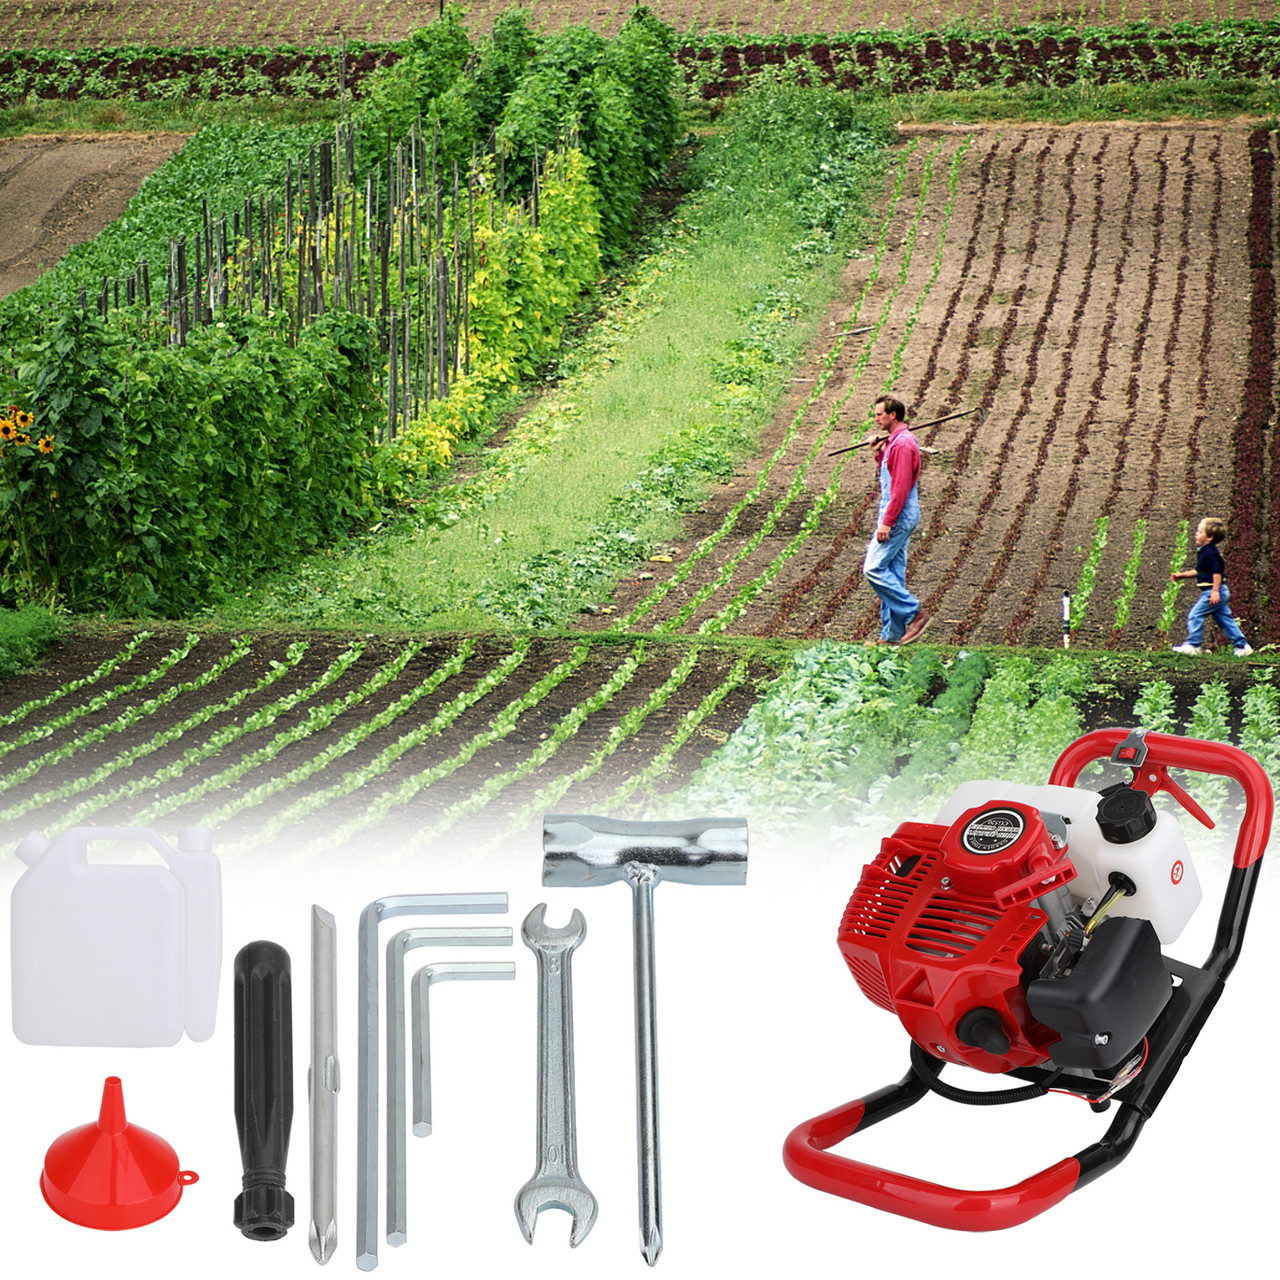 52cc 2-Stroke Gasoline Gas One Man Post Hole Digger Earth Auger Machine 2hp EPA